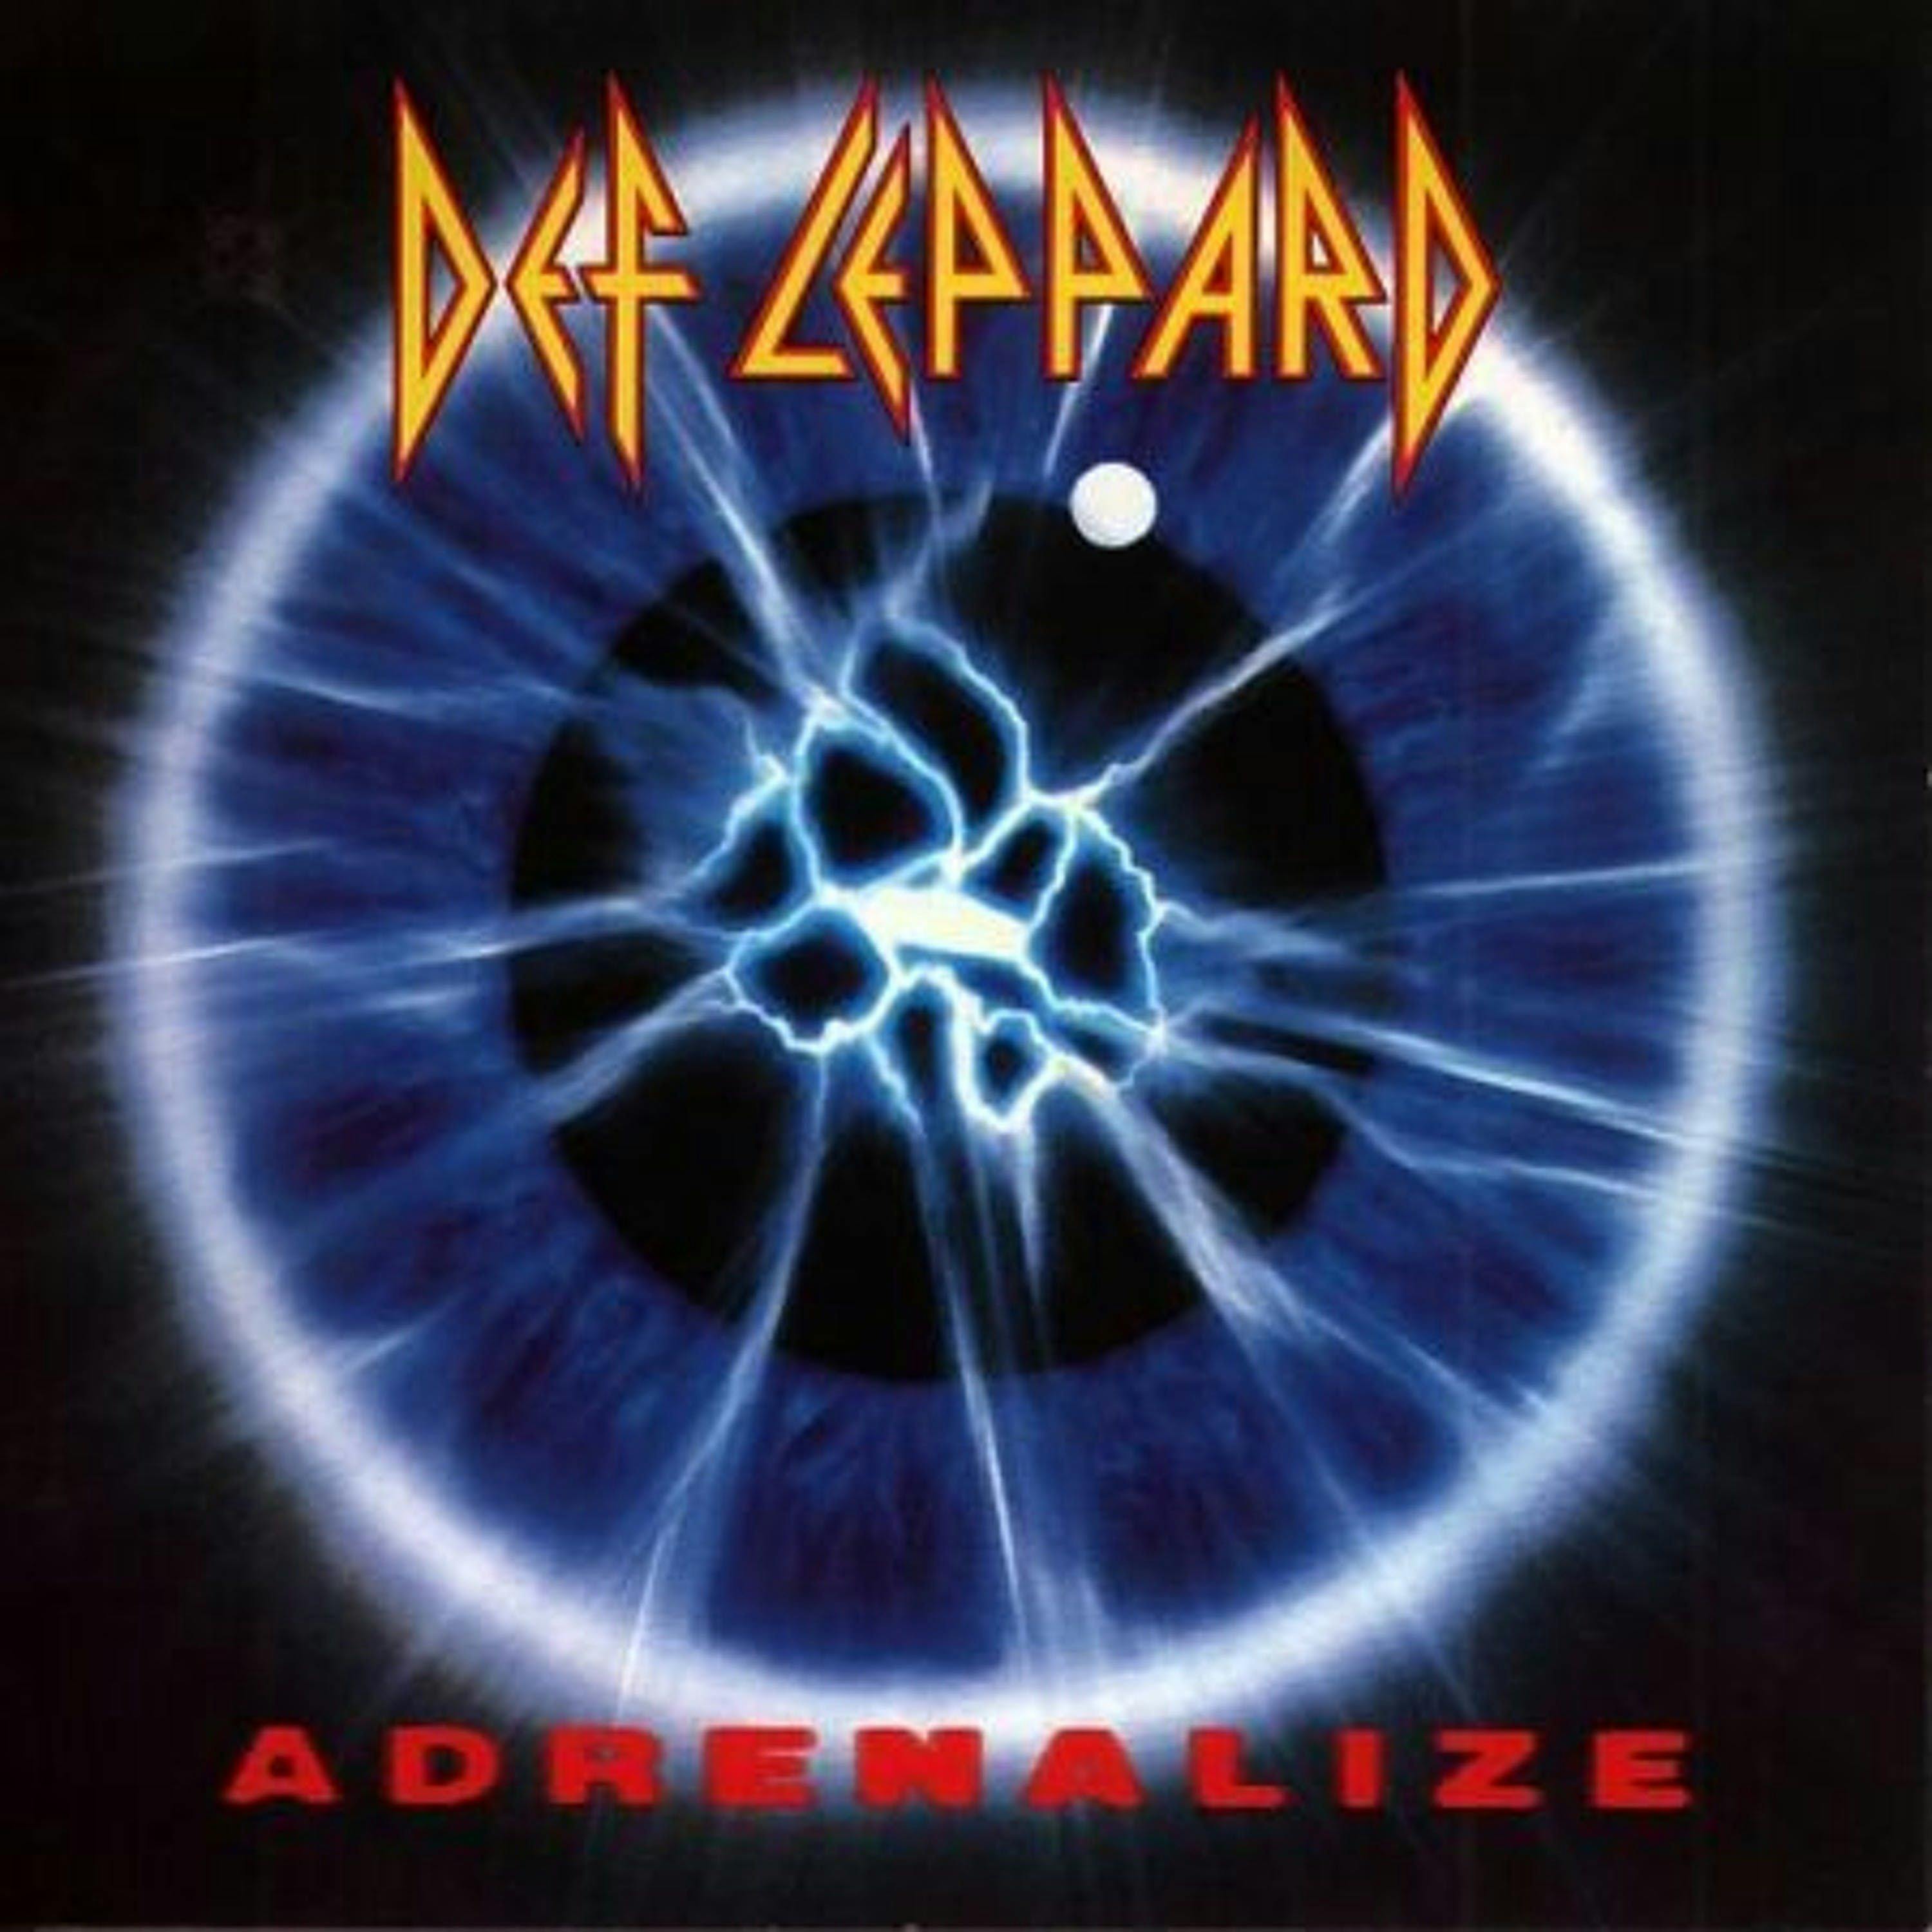 EP 212: Def Leppard - Adrenalize - March Badness